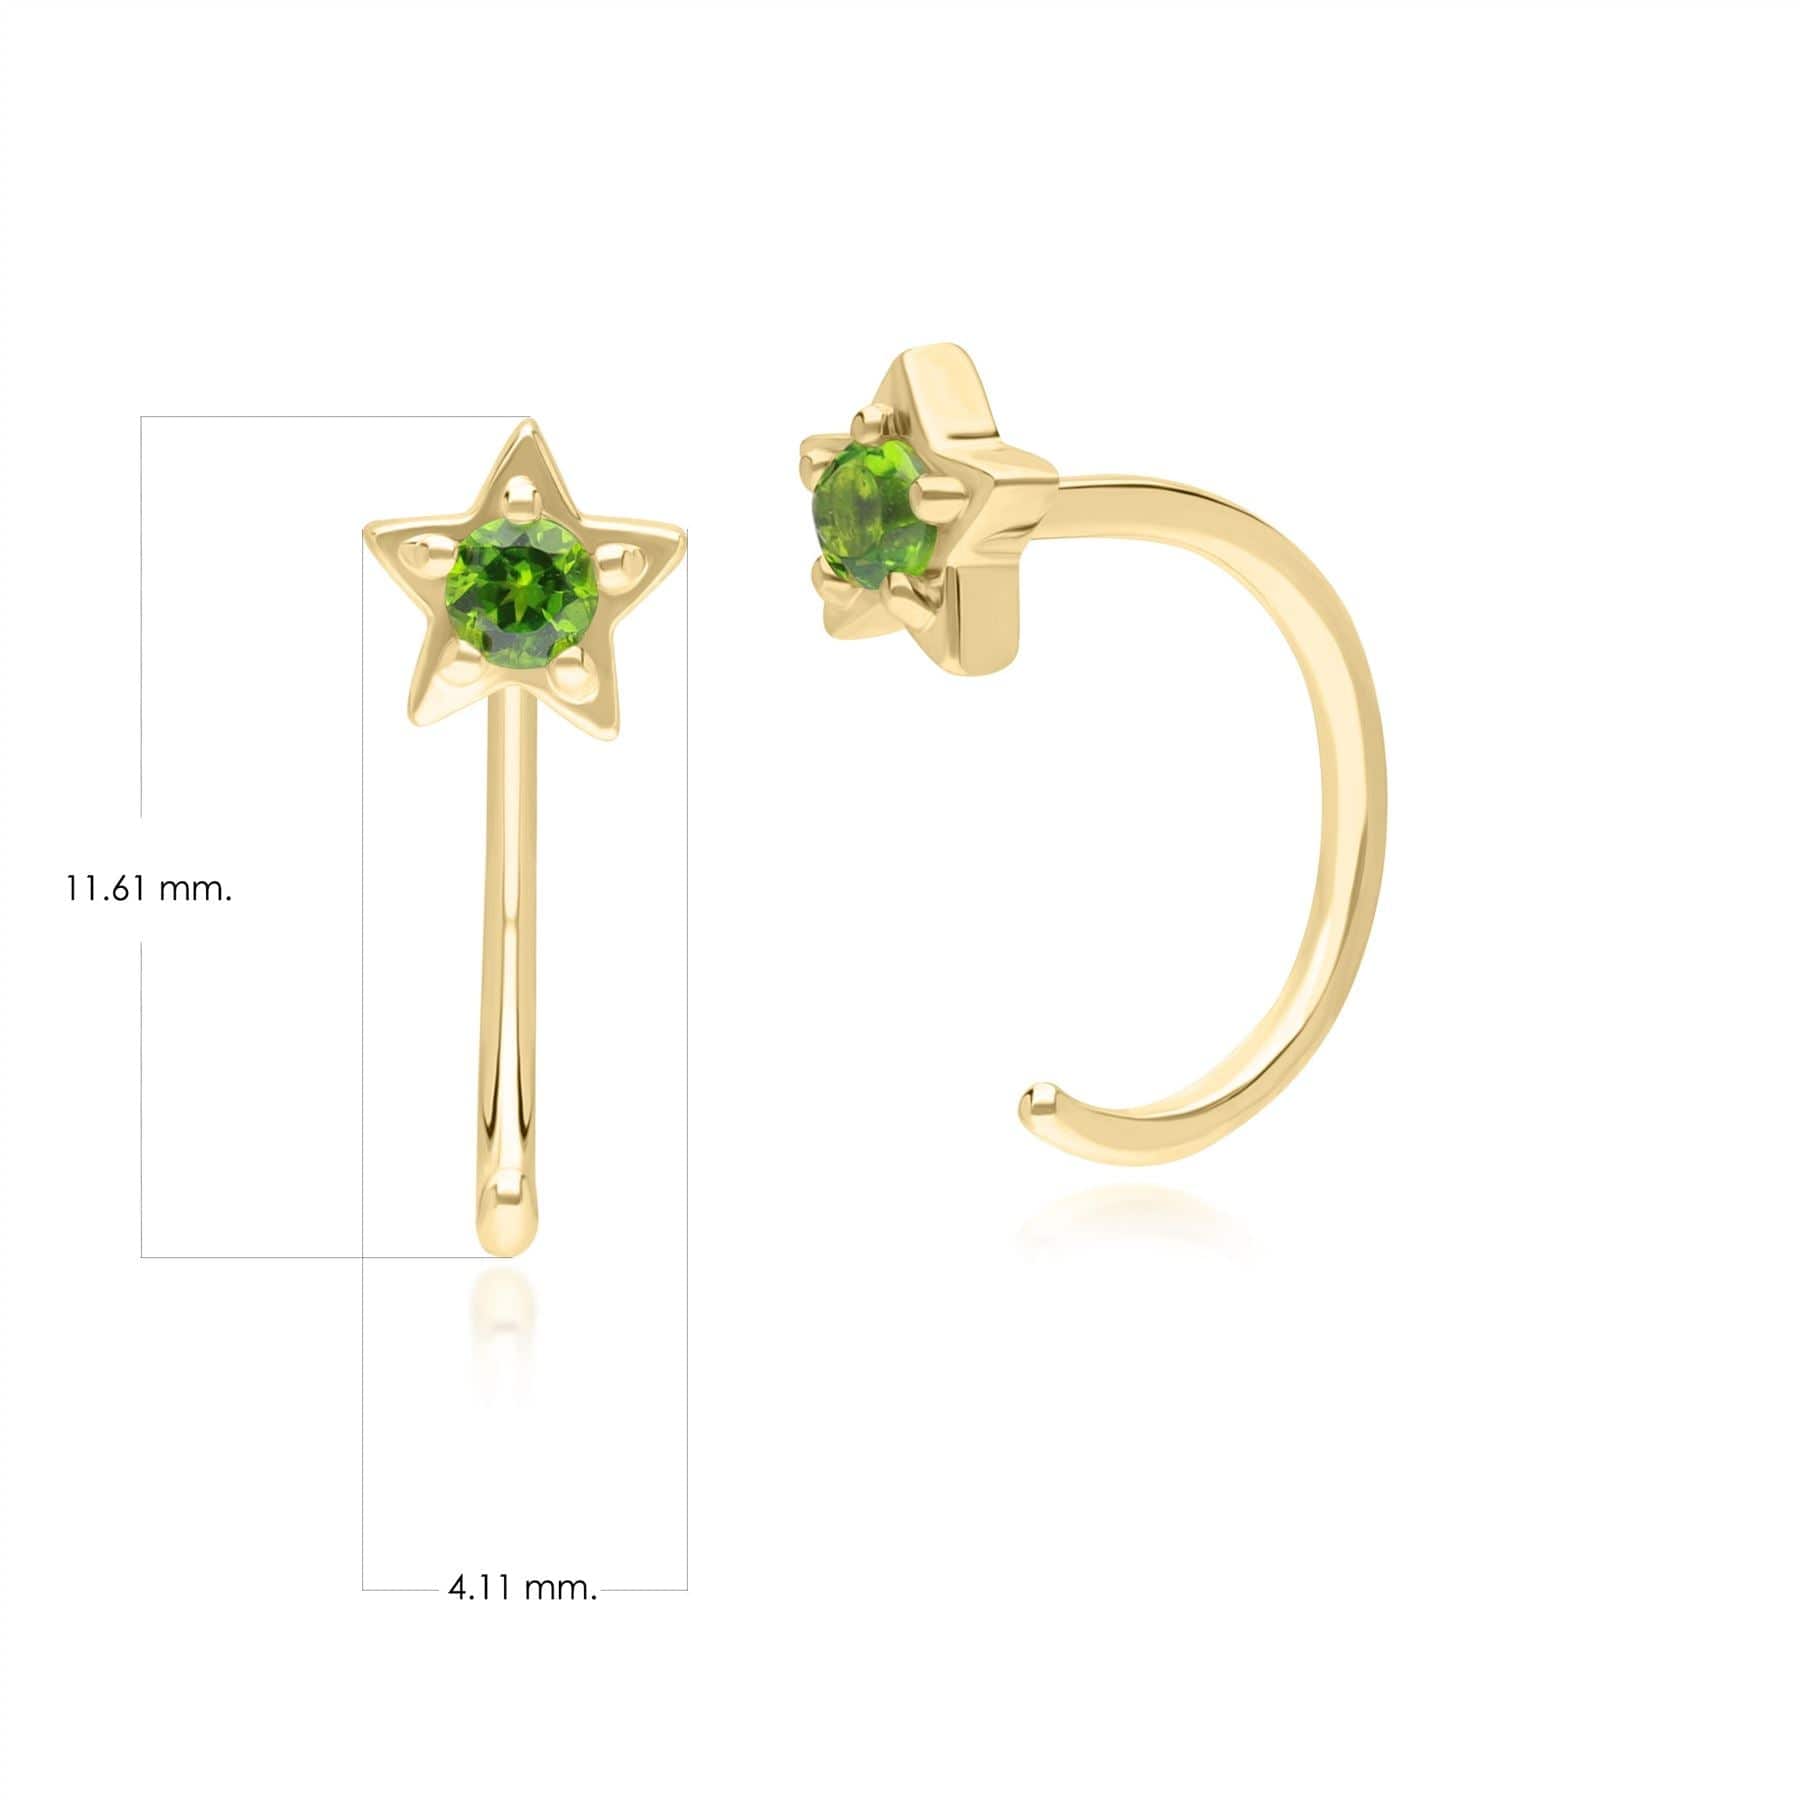 135E1822019 Modern Classic Chrome Diopside Pull Through Hoop Earrings in 9ct Yellow Gold Dimensions